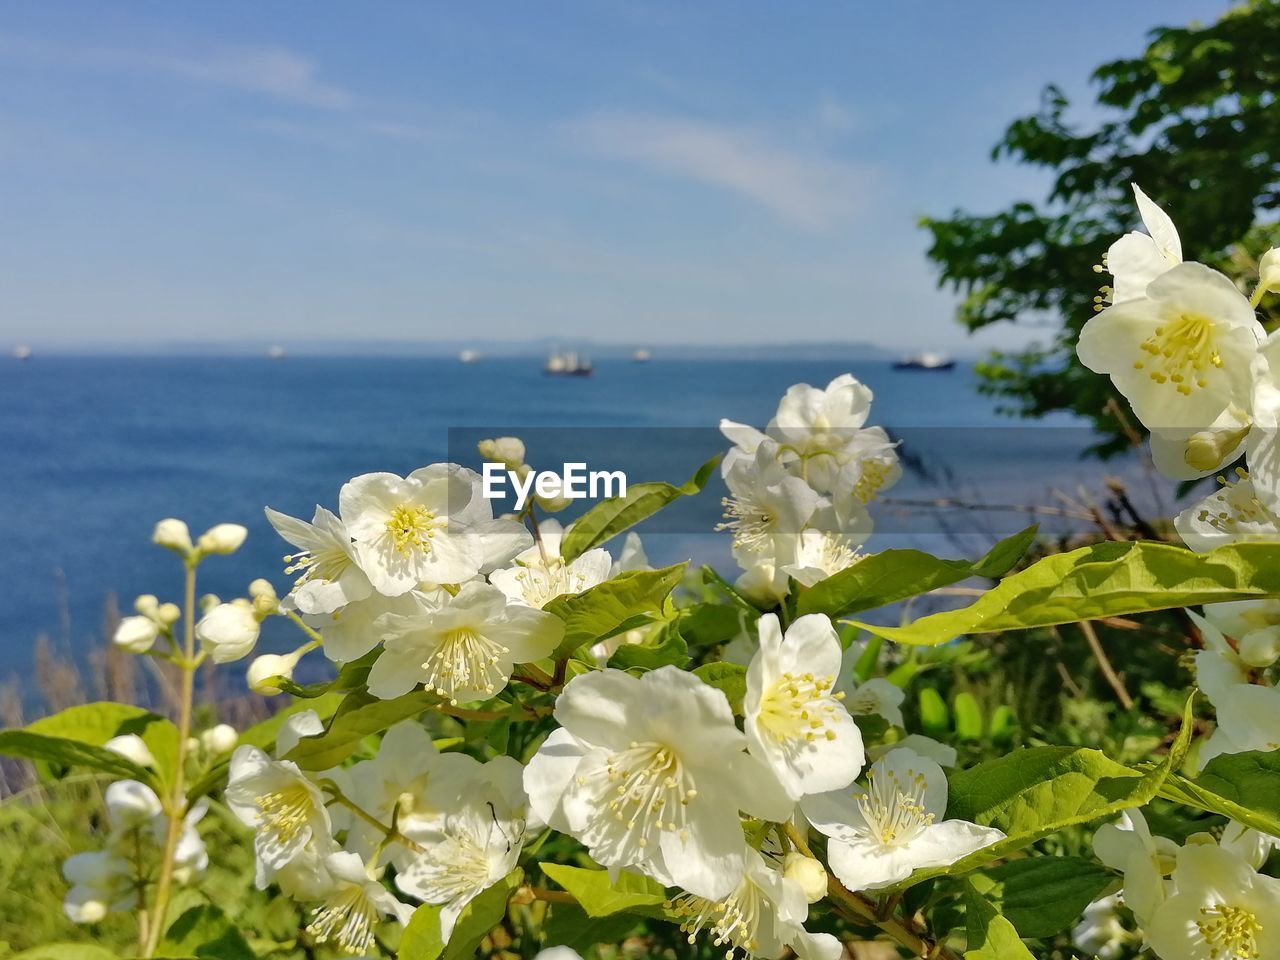 CLOSE-UP OF WHITE FLOWERING PLANTS AGAINST SEA